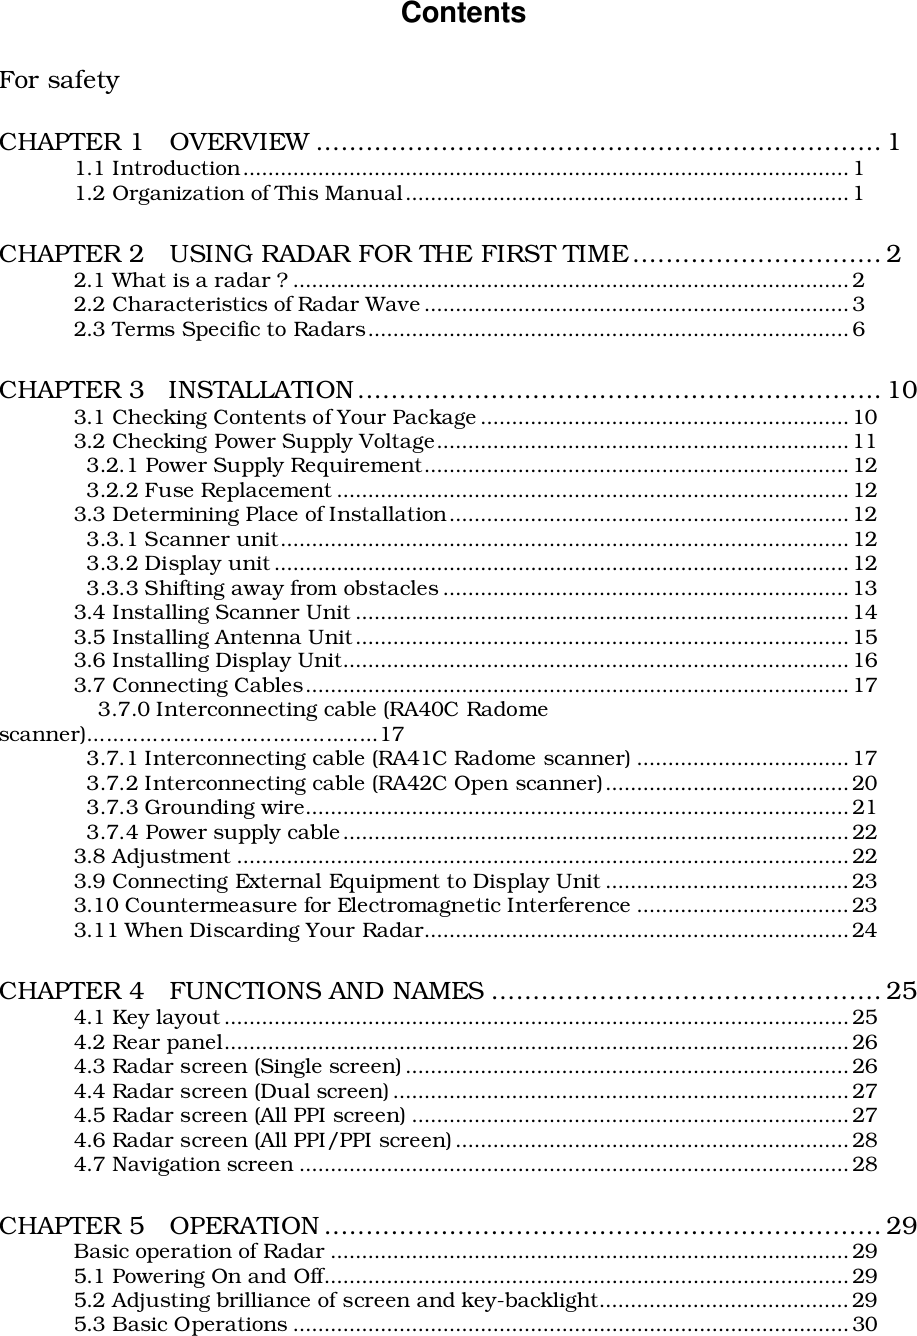 ContentsFor safetyCHAPTER 1   OVERVIEW .................................................................... 11.1 Introduction.................................................................................................11.2 Organization of This Manual....................................................................... 1CHAPTER 2   USING RADAR FOR THE FIRST TIME.............................. 22.1 What is a radar ? .........................................................................................22.2 Characteristics of Radar Wave .................................................................... 32.3 Terms Specific to Radars............................................................................. 6CHAPTER 3   INSTALLATION............................................................... 103.1 Checking Contents of Your Package ........................................................... 103.2 Checking Power Supply Voltage.................................................................. 11  3.2.1 Power Supply Requirement....................................................................12  3.2.2 Fuse Replacement ..................................................................................123.3 Determining Place of Installation................................................................12  3.3.1 Scanner unit........................................................................................... 12  3.3.2 Display unit ............................................................................................12  3.3.3 Shifting away from obstacles ................................................................. 133.4 Installing Scanner Unit ............................................................................... 143.5 Installing Antenna Unit............................................................................... 153.6 Installing Display Unit................................................................................. 163.7 Connecting Cables....................................................................................... 17               3.7.0 Interconnecting cable (RA40C Radomescanner)............................................17  3.7.1 Interconnecting cable (RA41C Radome scanner) ..................................17  3.7.2 Interconnecting cable (RA42C Open scanner)....................................... 20  3.7.3 Grounding wire....................................................................................... 21  3.7.4 Power supply cable .................................................................................223.8 Adjustment .................................................................................................. 223.9 Connecting External Equipment to Display Unit .......................................233.10 Countermeasure for Electromagnetic Interference .................................. 233.11 When Discarding Your Radar.................................................................... 24CHAPTER 4   FUNCTIONS AND NAMES ............................................... 254.1 Key layout .................................................................................................... 254.2 Rear panel.................................................................................................... 264.3 Radar screen (Single screen) ....................................................................... 264.4 Radar screen (Dual screen) .........................................................................274.5 Radar screen (All PPI screen) ......................................................................274.6 Radar screen (All PPI/PPI screen) ............................................................... 284.7 Navigation screen ........................................................................................ 28CHAPTER 5   OPERATION ................................................................... 29Basic operation of Radar ...................................................................................295.1 Powering On and Off.................................................................................... 295.2 Adjusting brilliance of screen and key-backlight........................................295.3 Basic Operations ......................................................................................... 30